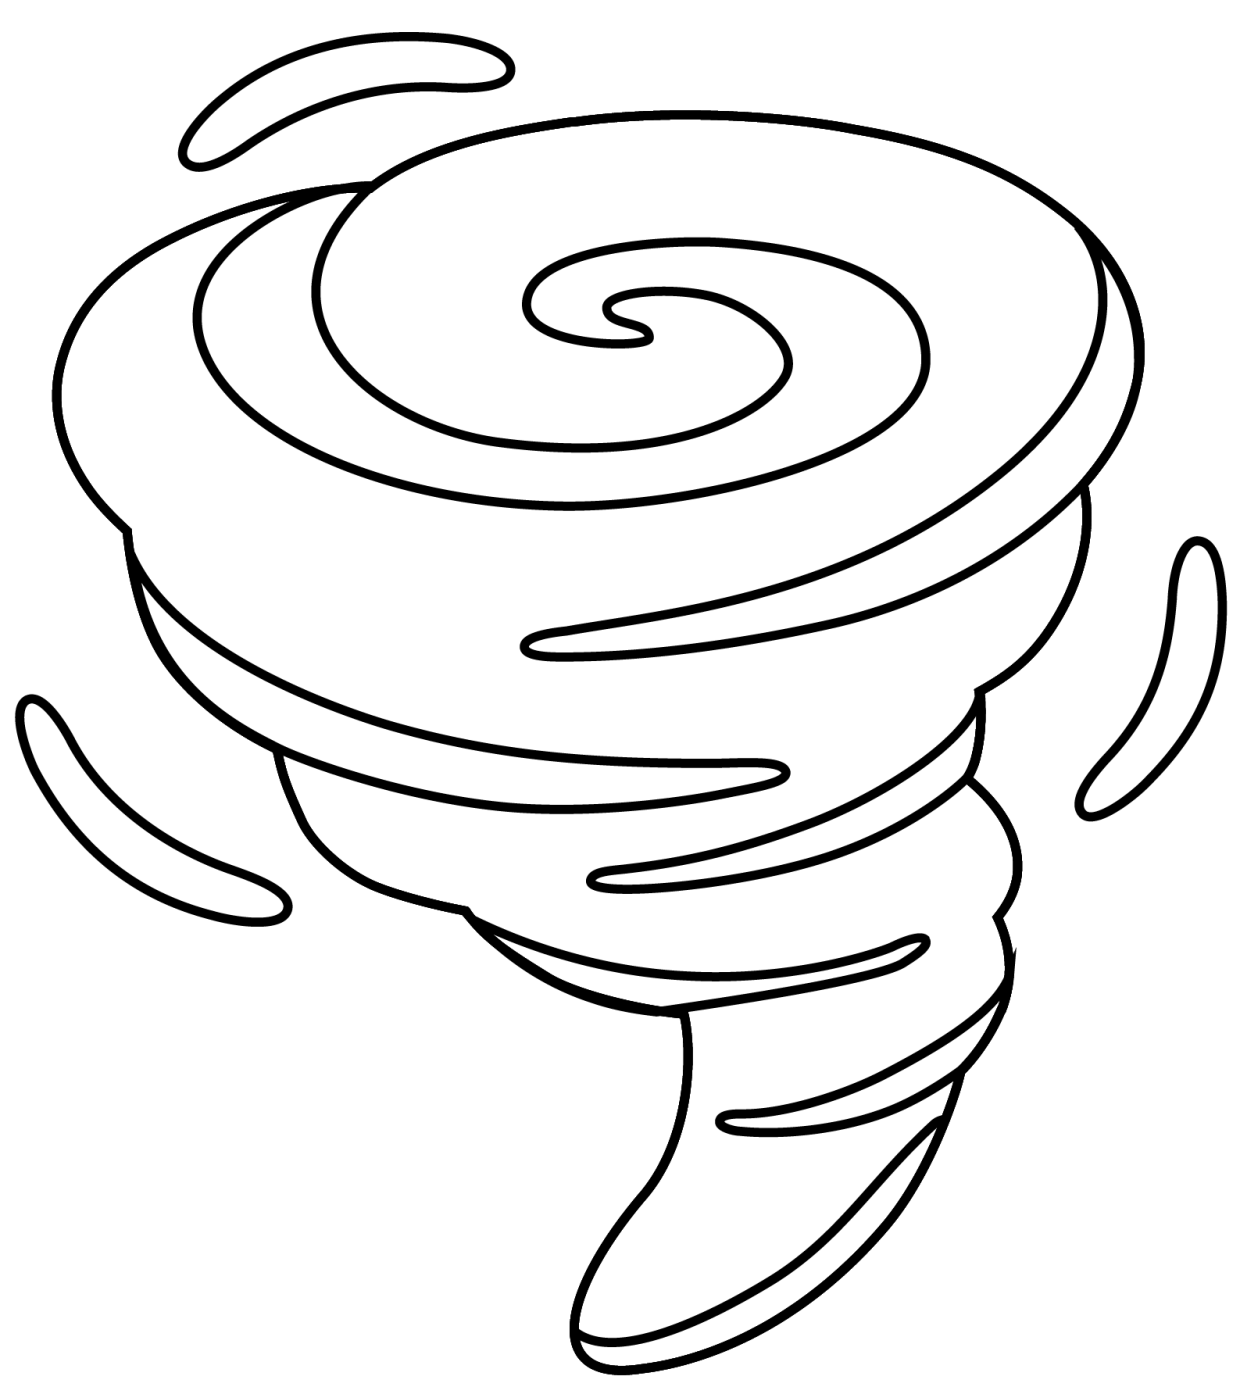 Get Creative with Tornado Coloring Pages: Free Printable Sheets